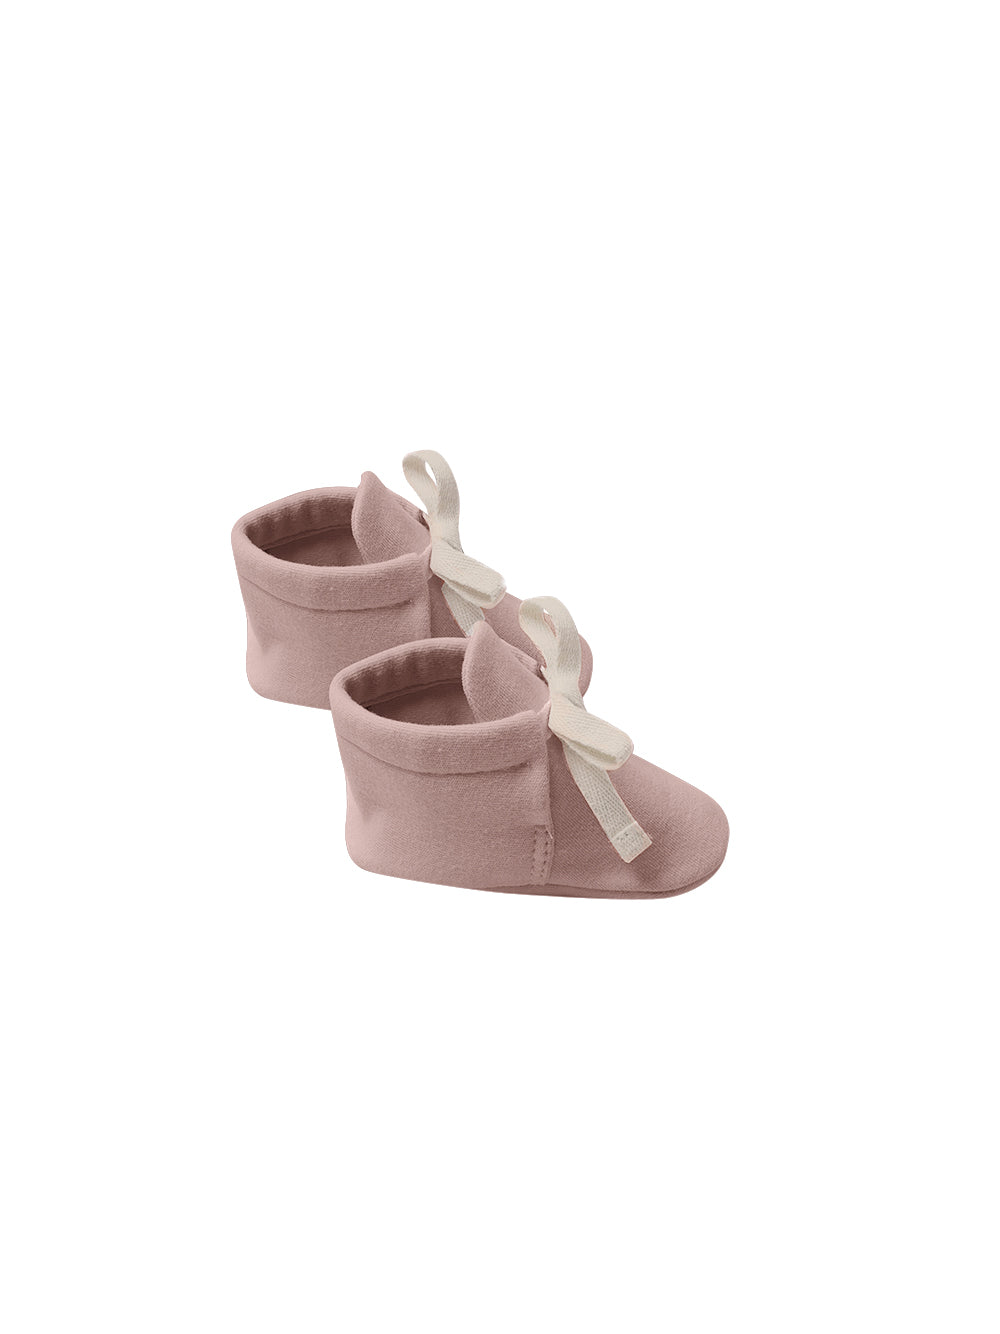 Baby Booties - Lilac - Child Boutique